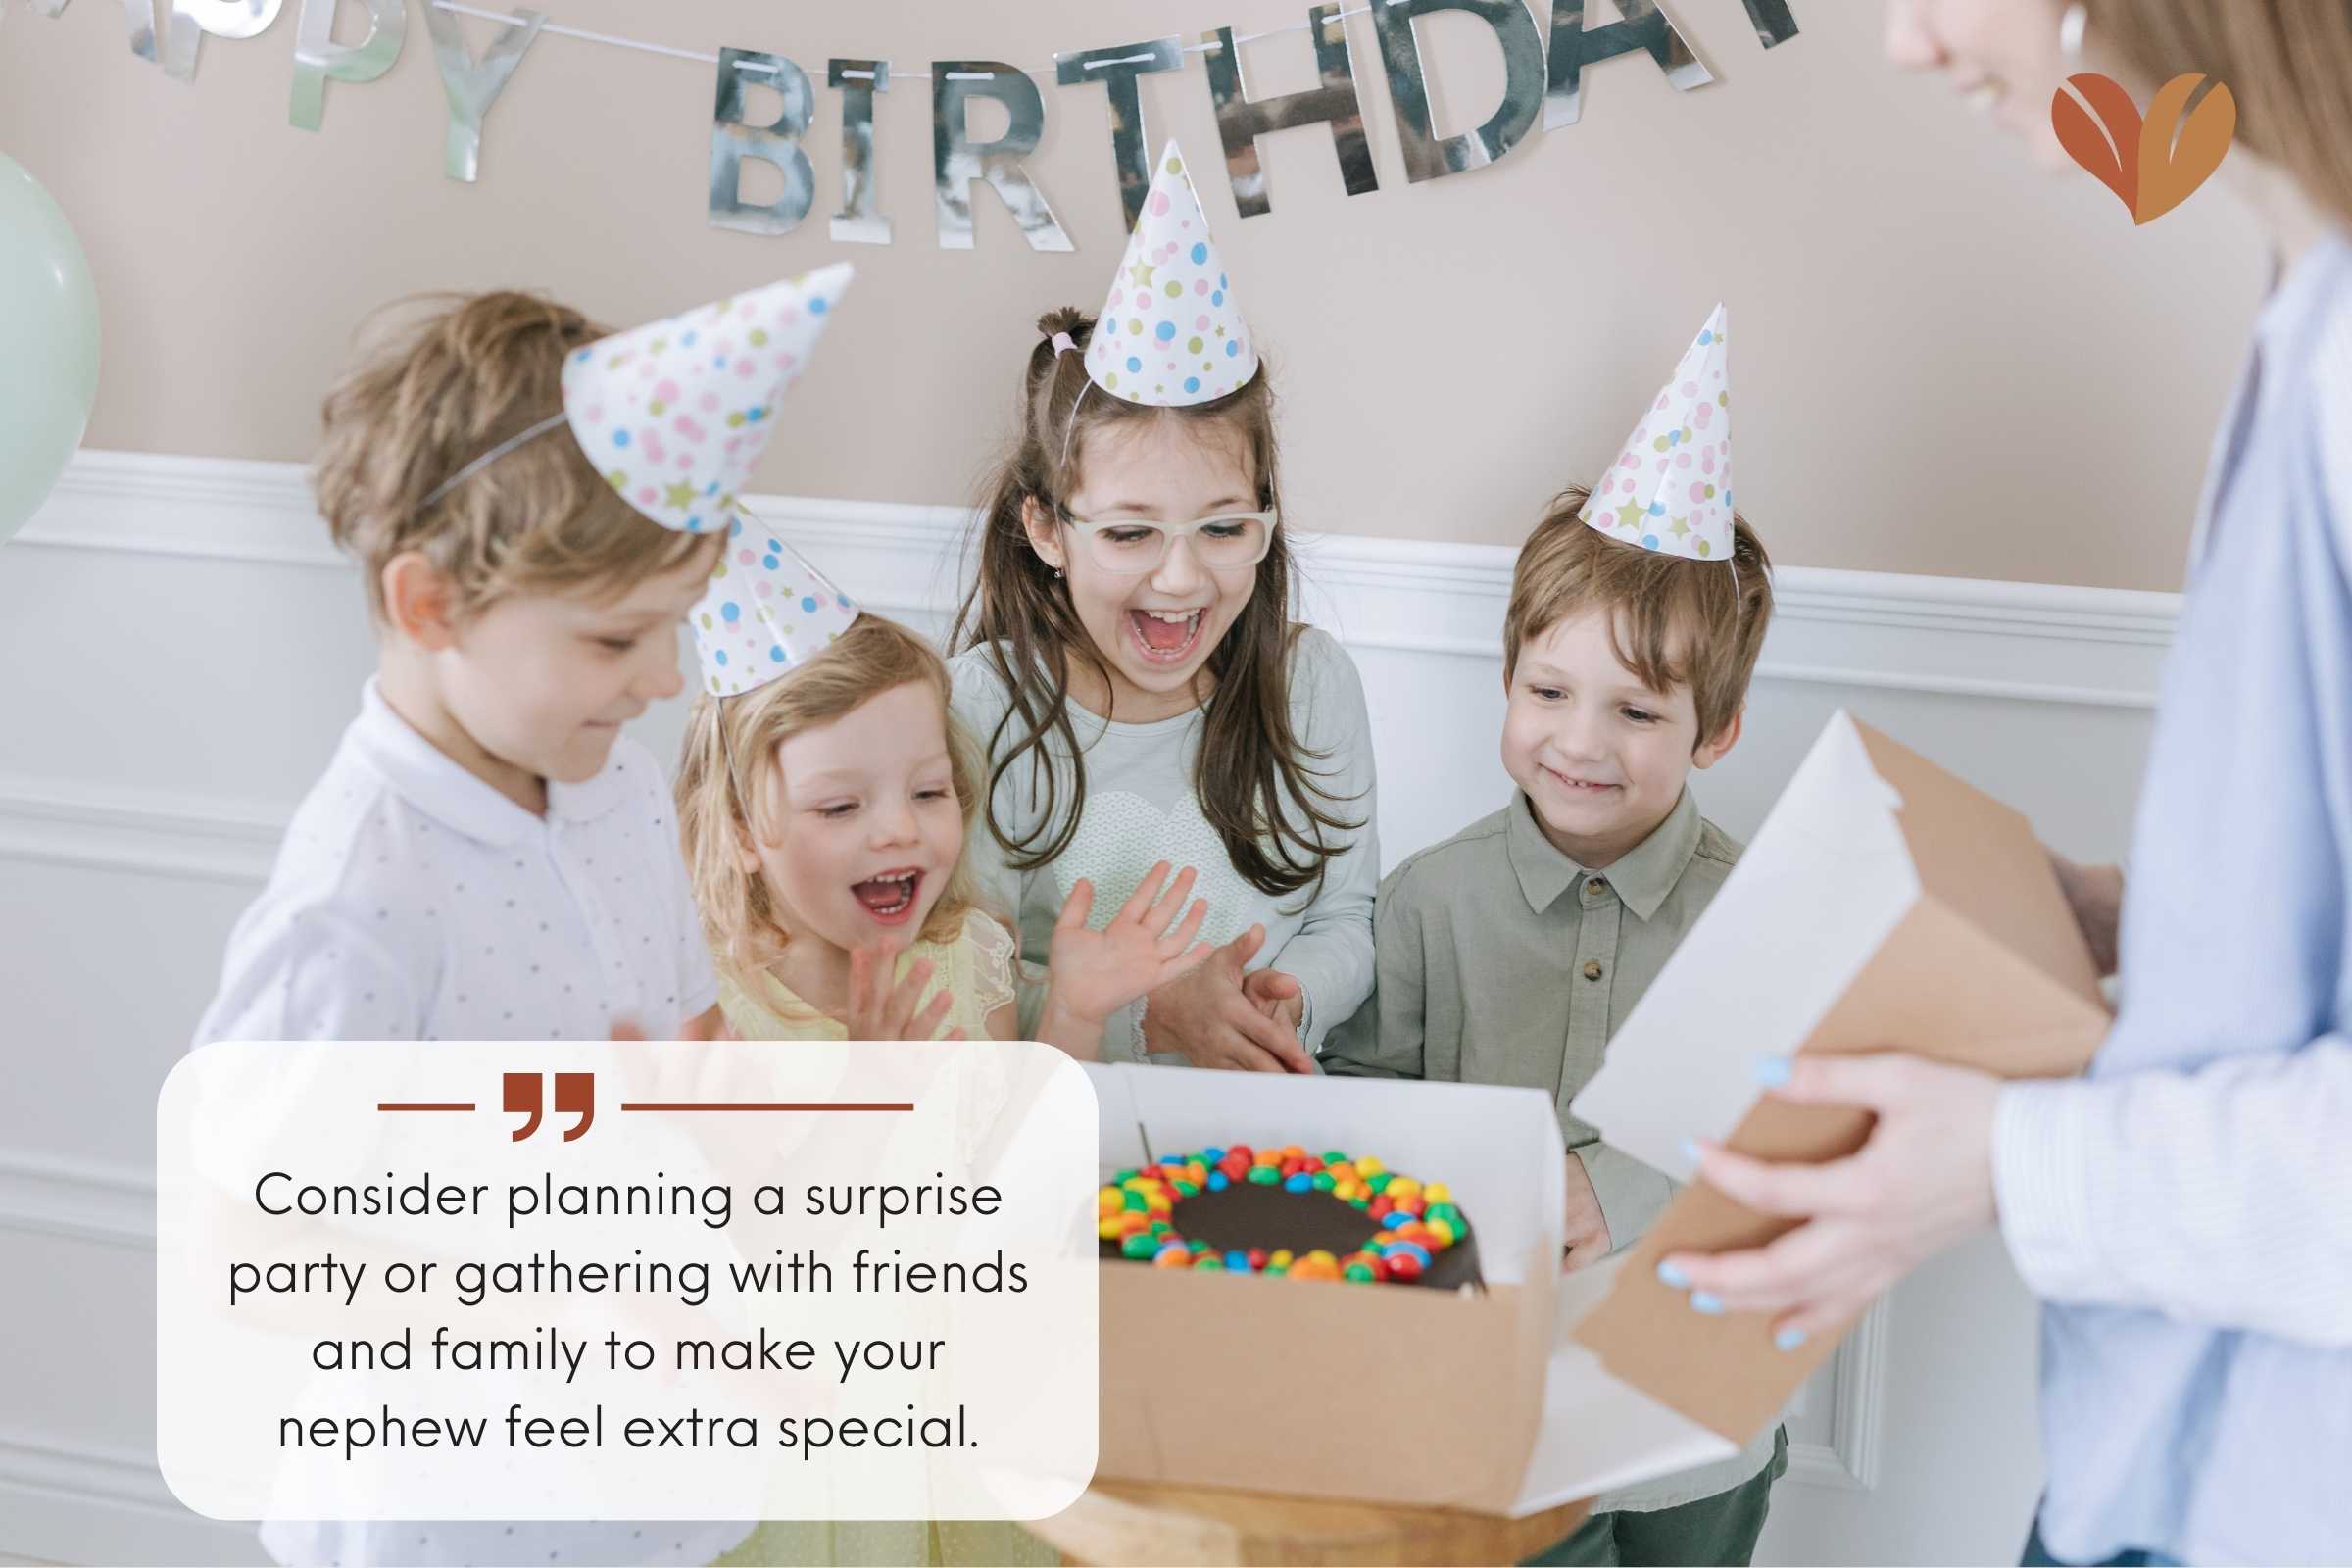 Capturing love and laughter: beautiful birthday wishes for a nephew from aunt.